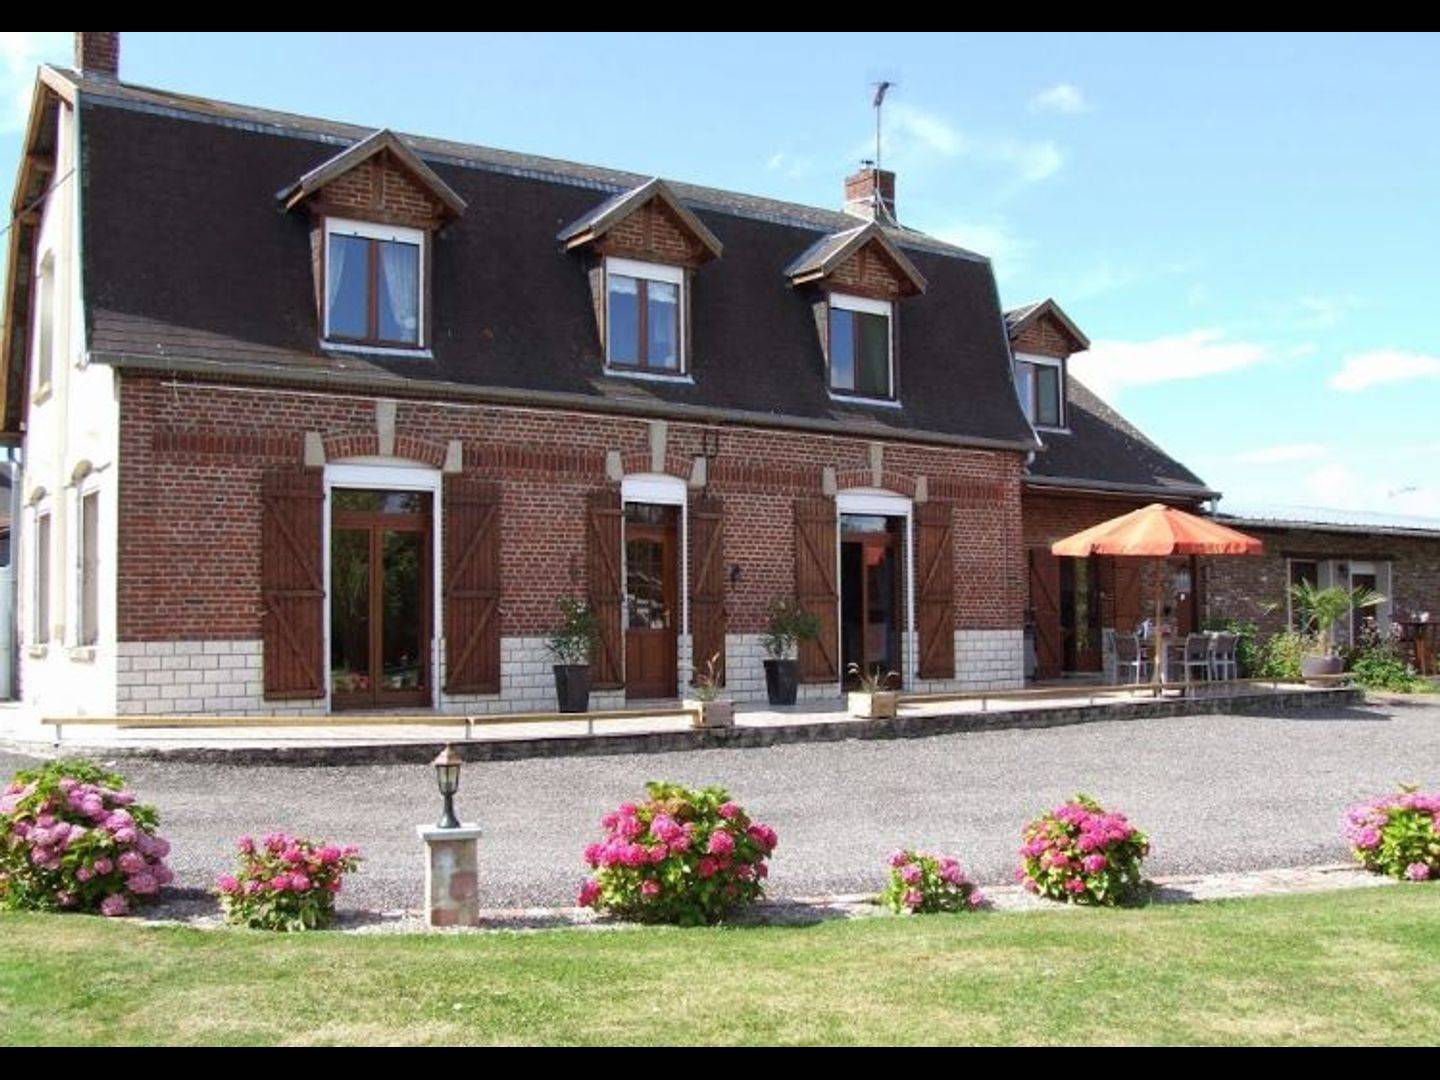 Gueudecourt Bed and Breakfast